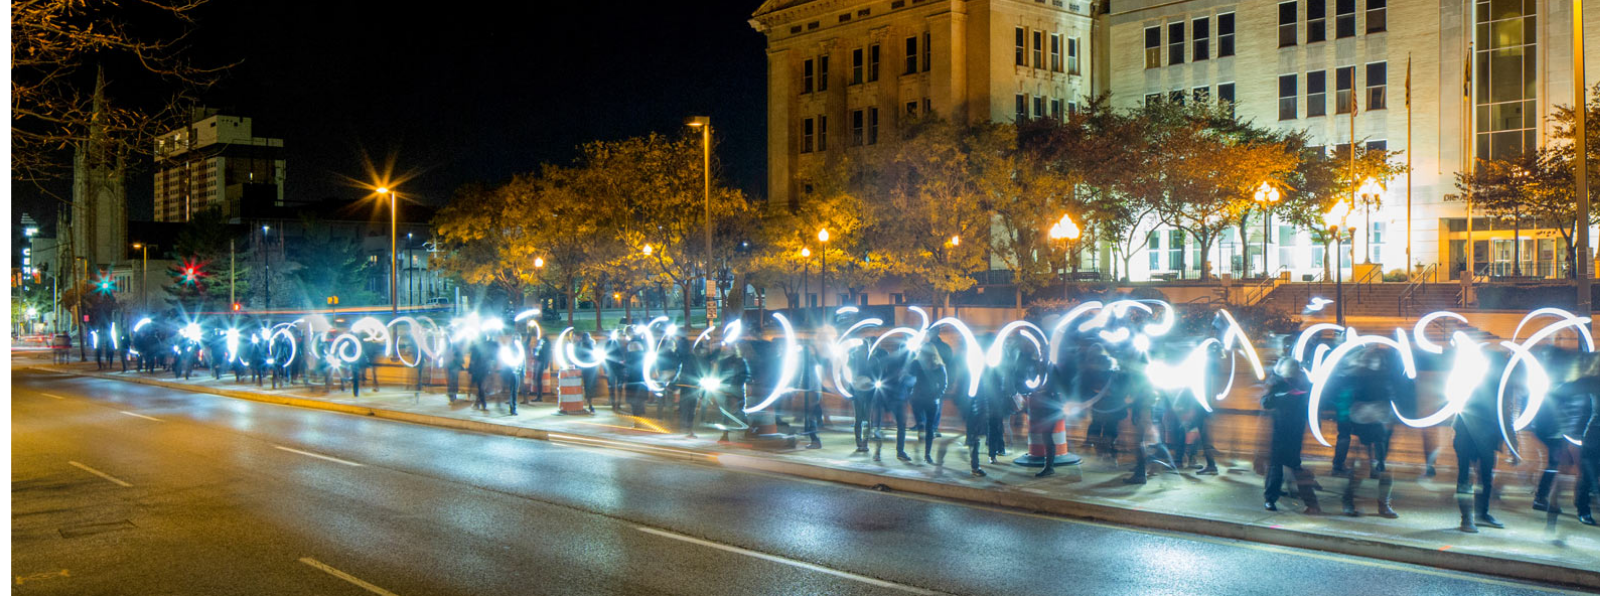 A crowd of people on the sidewalk spinning lights in front of a building.